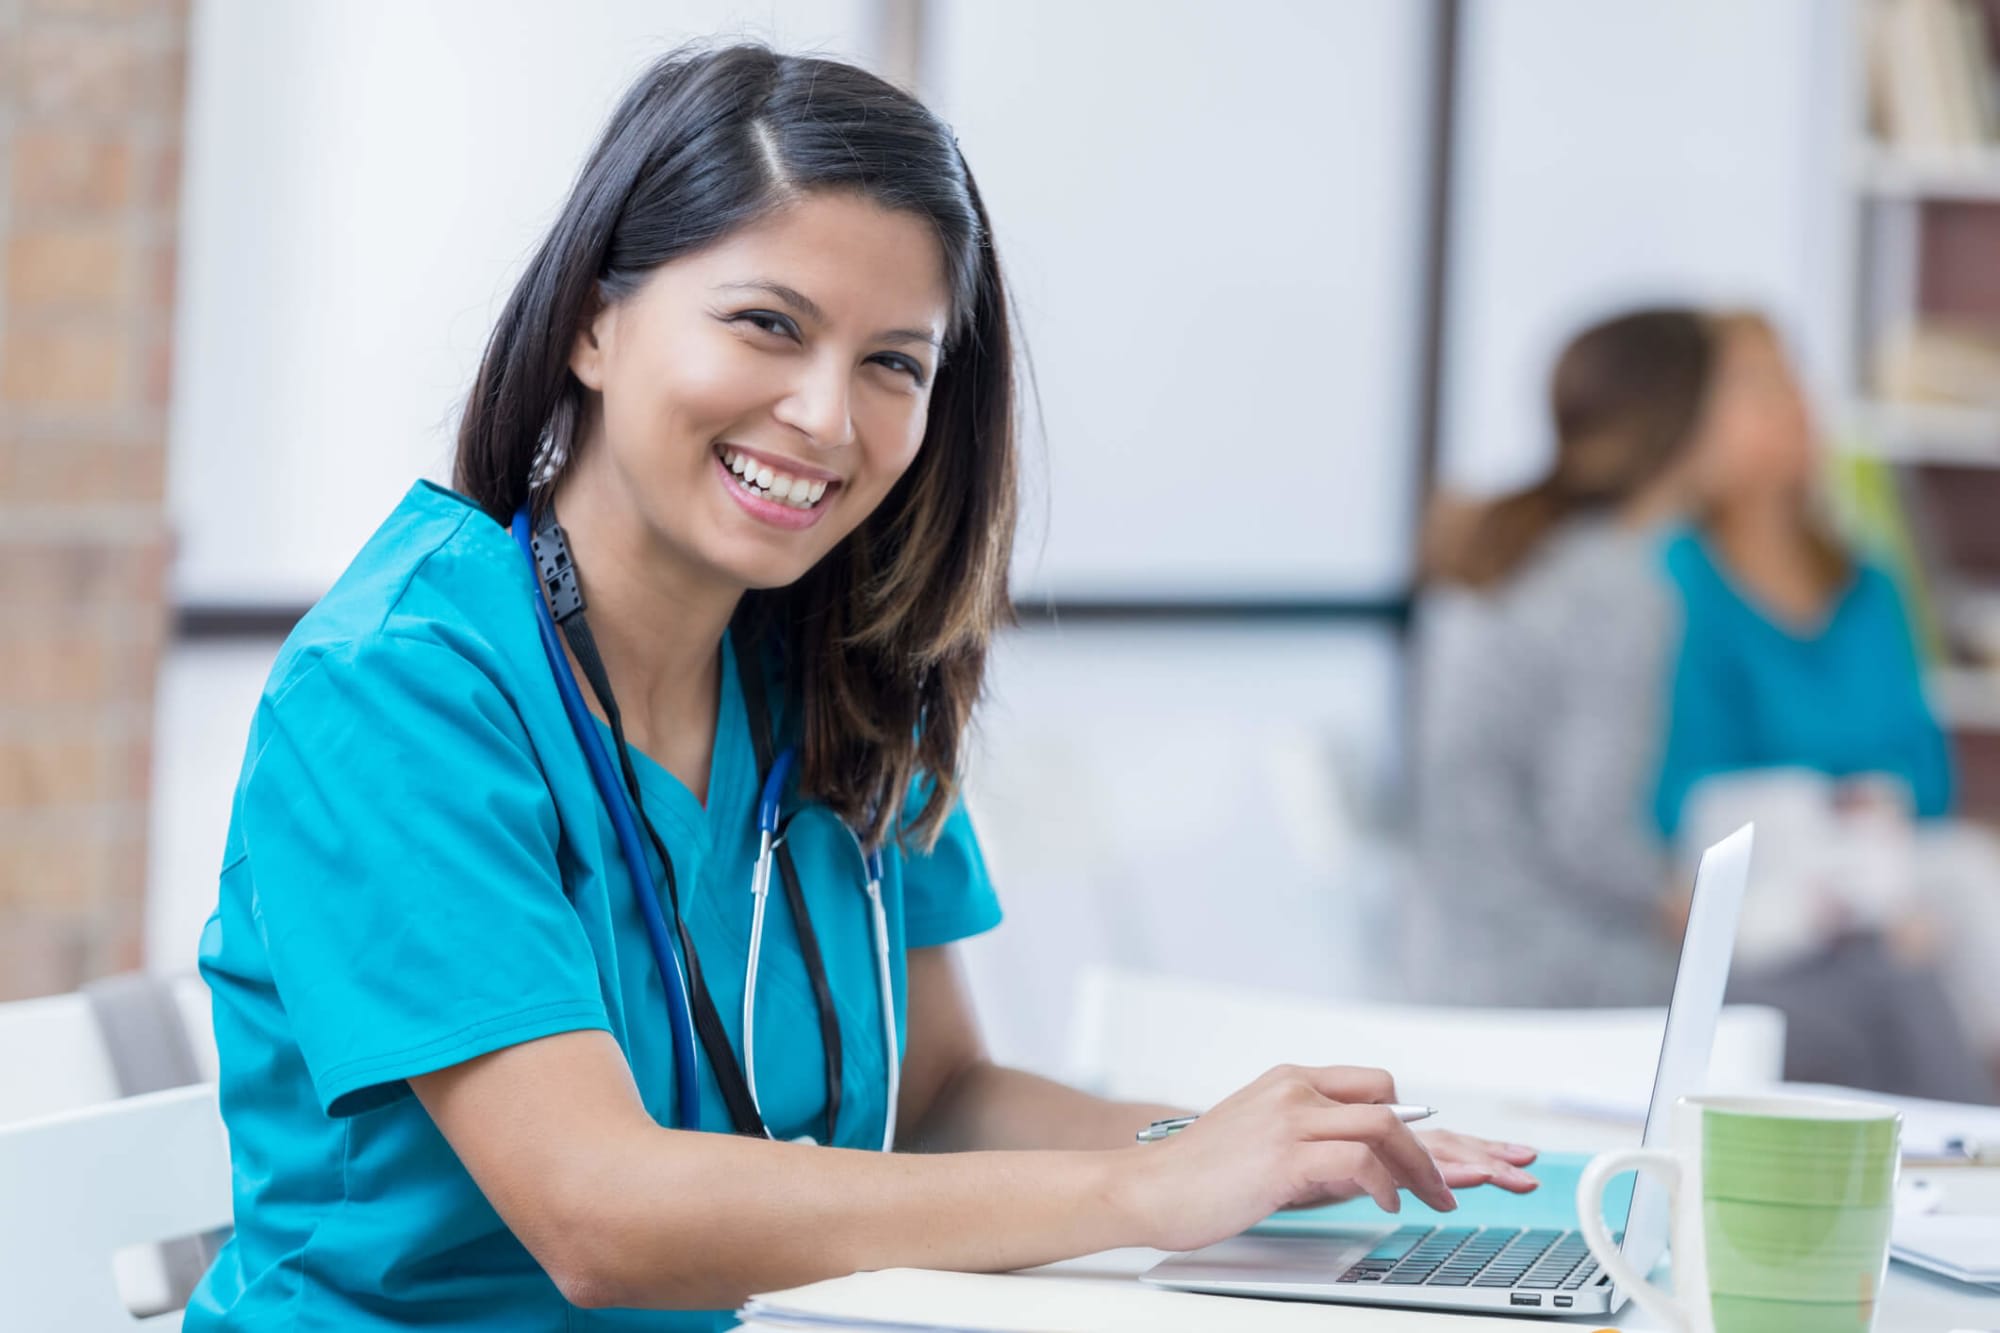 A female Filipino nurse is sitting down at her laptop to study. She is wearing scrubs and a stethoscope. She is smiling at the camera. Image credit: SDI Productions / E+ / Getty Images